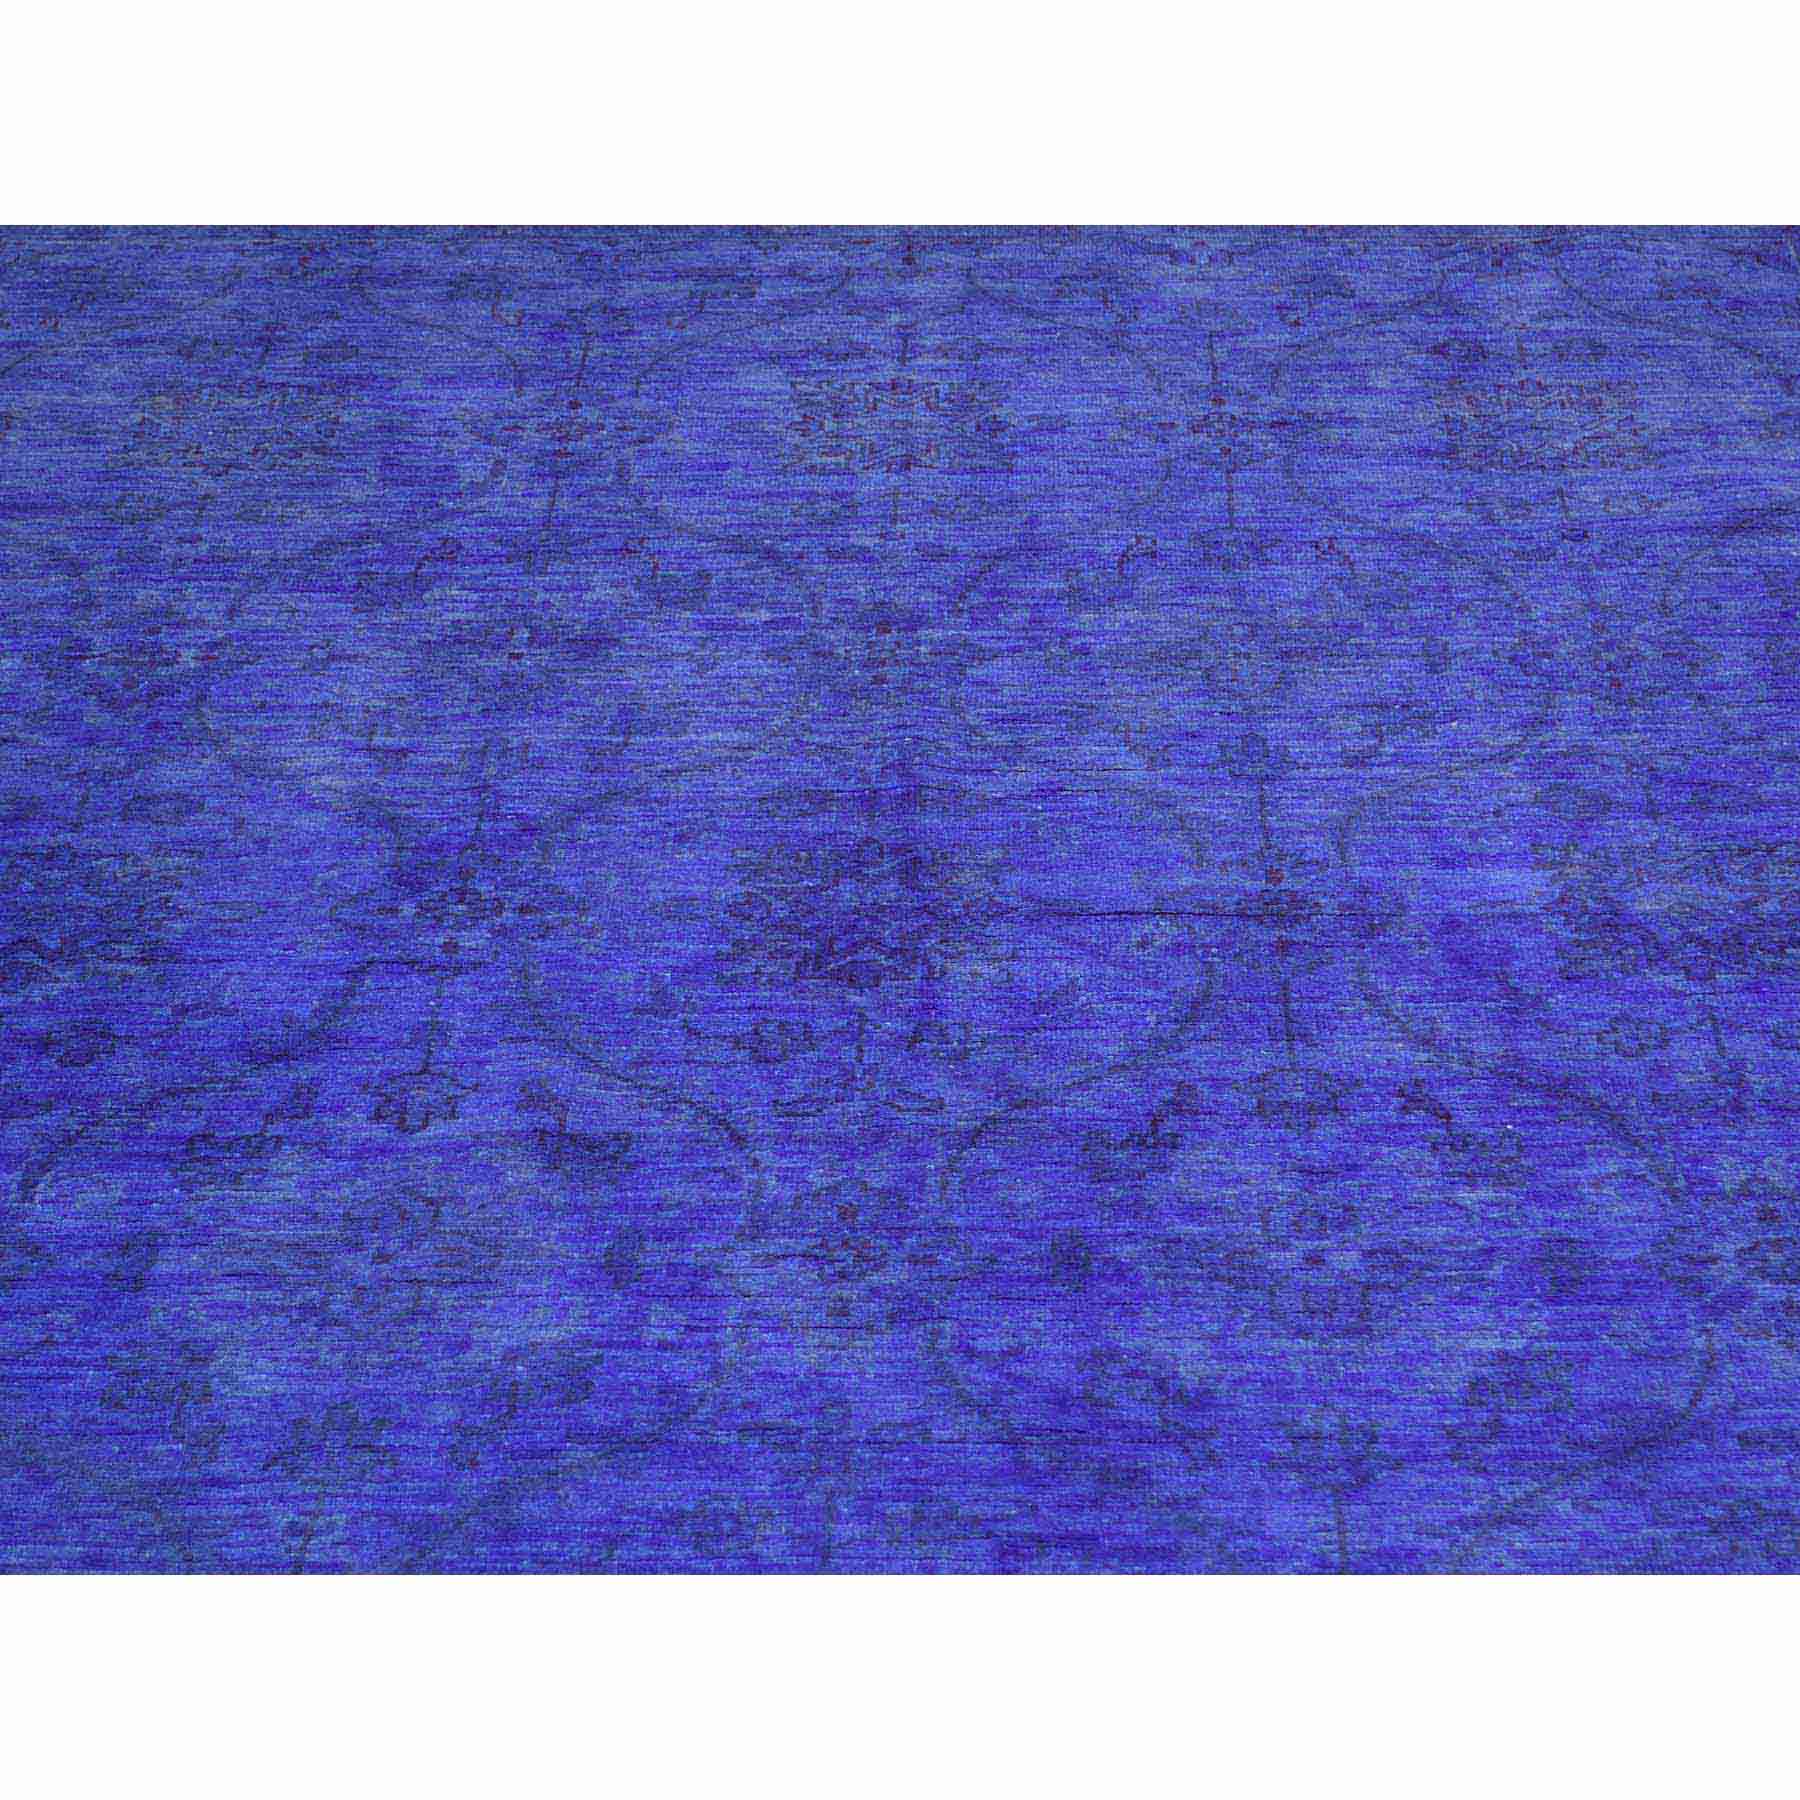 Overdyed-Vintage-Hand-Knotted-Rug-173790